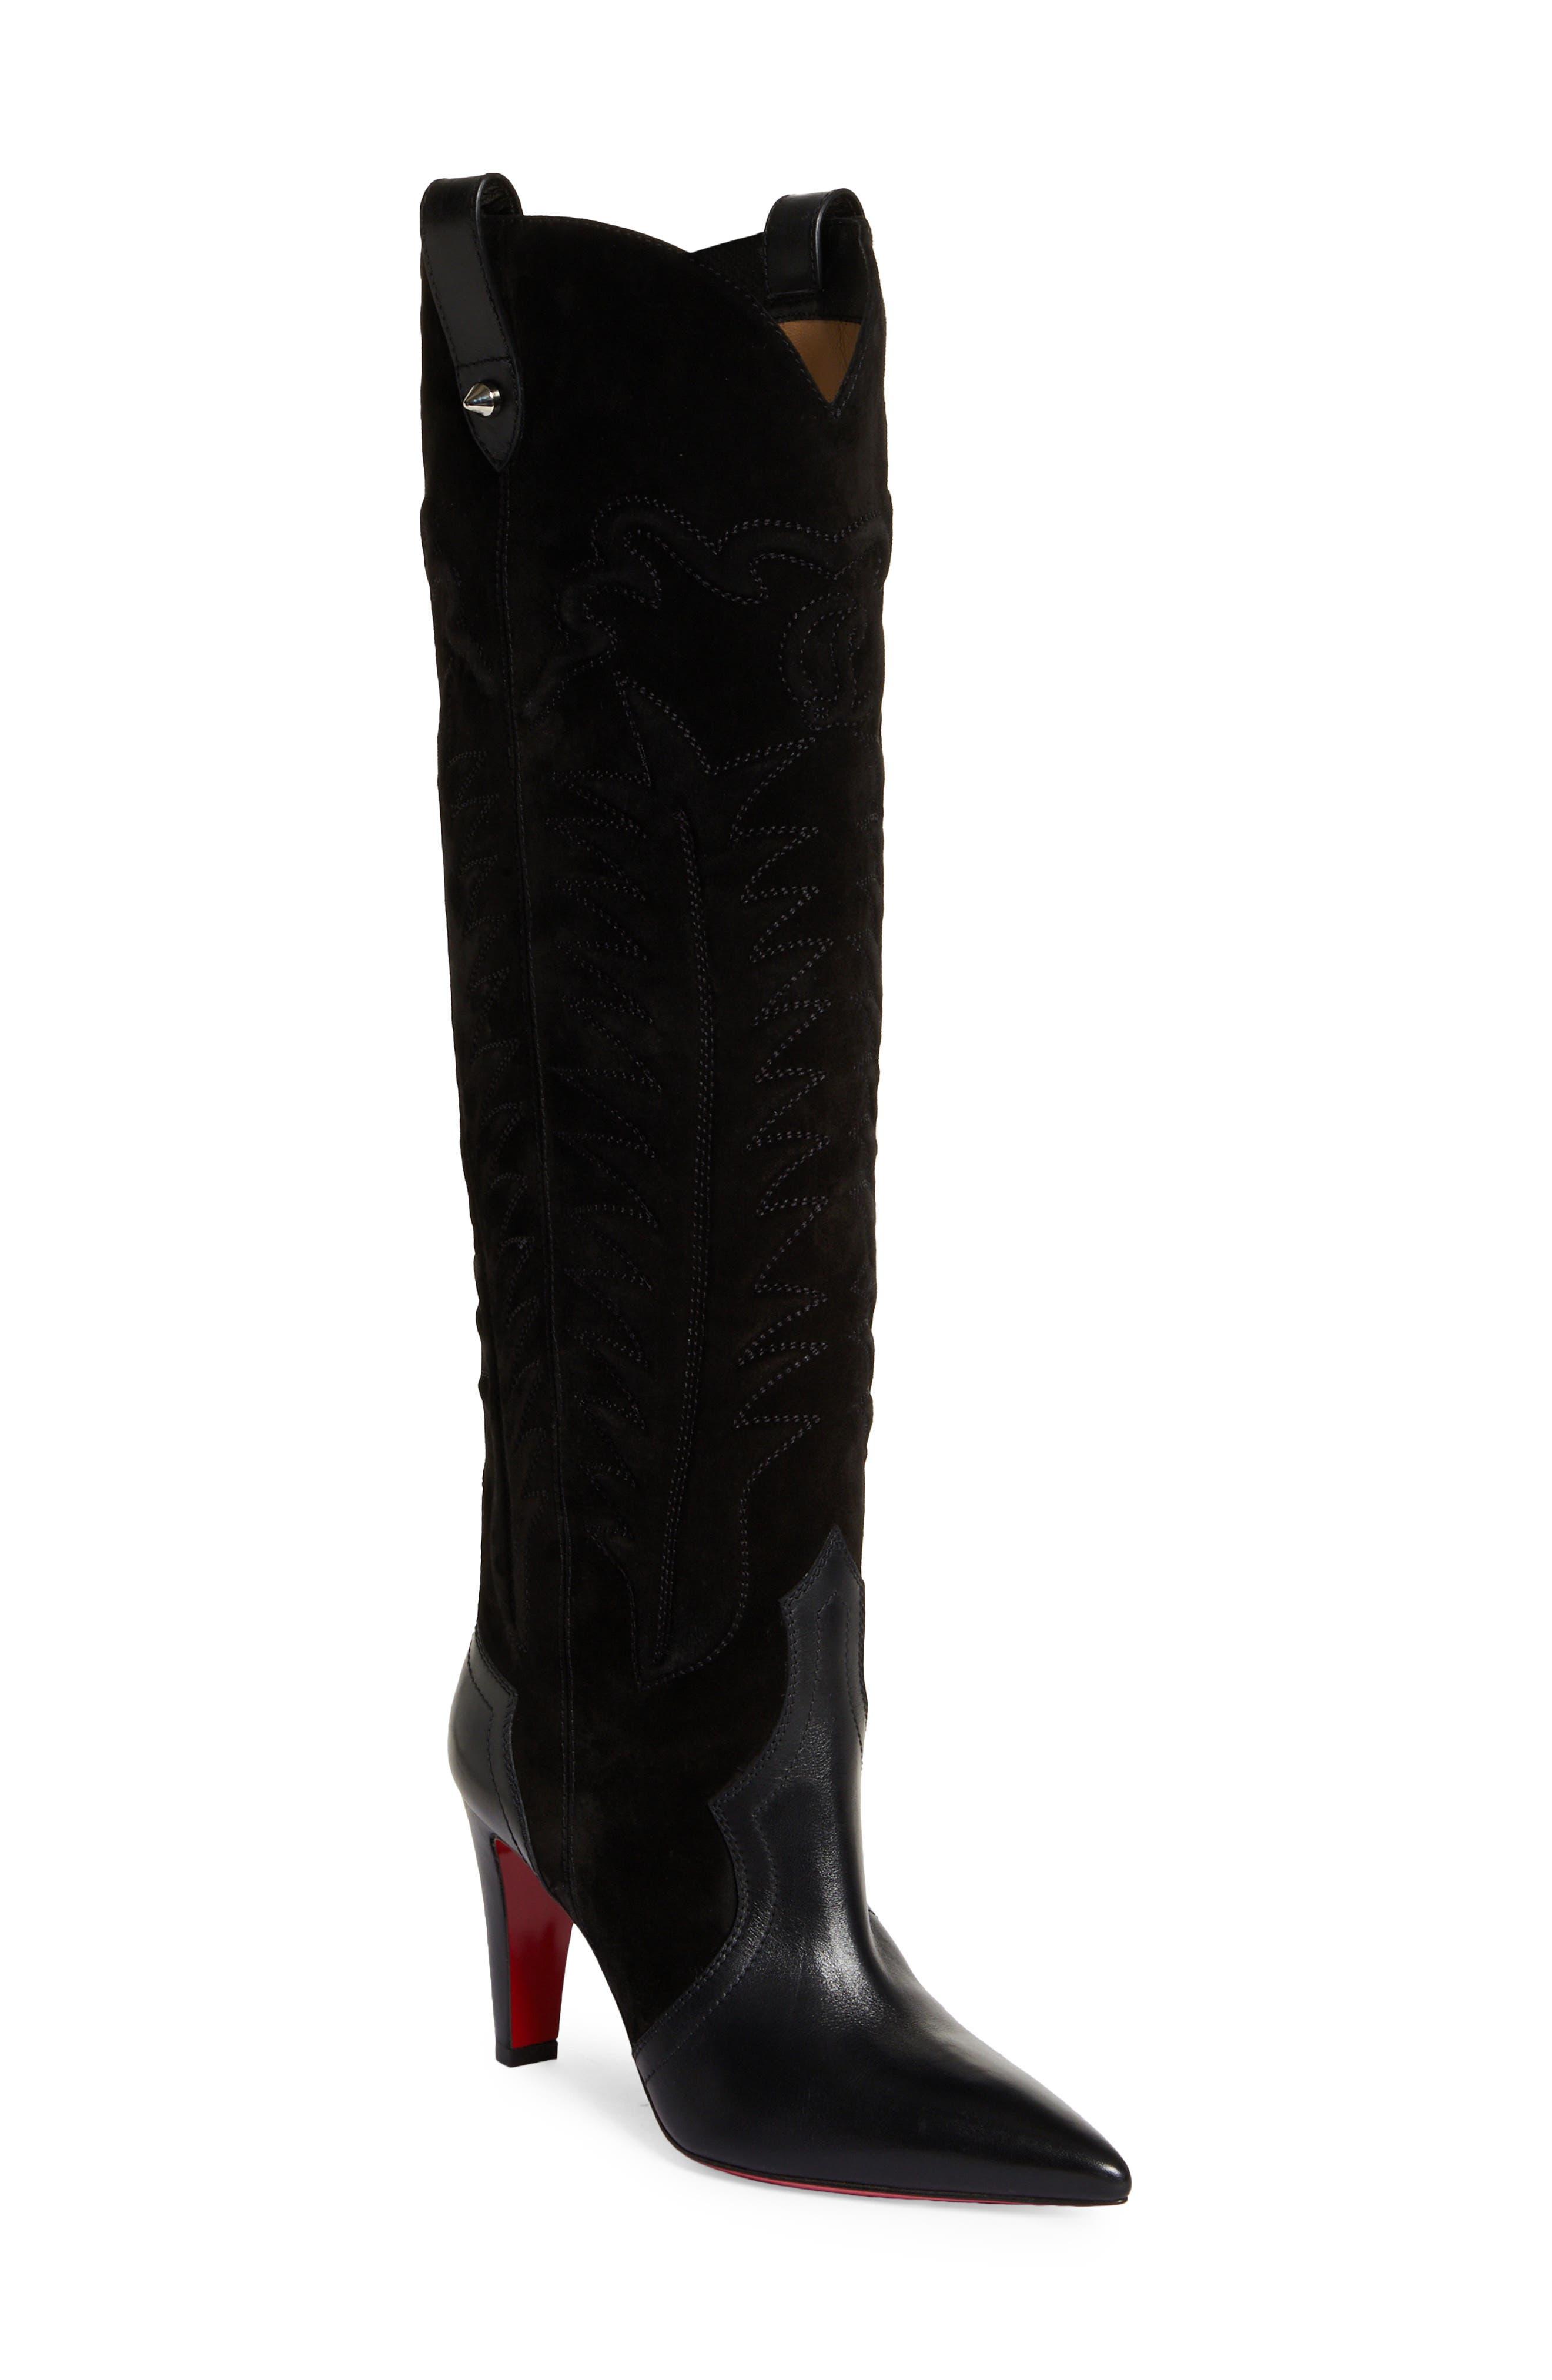 Christian Louboutin Santia Pointed Toe Knee High Boot in Black